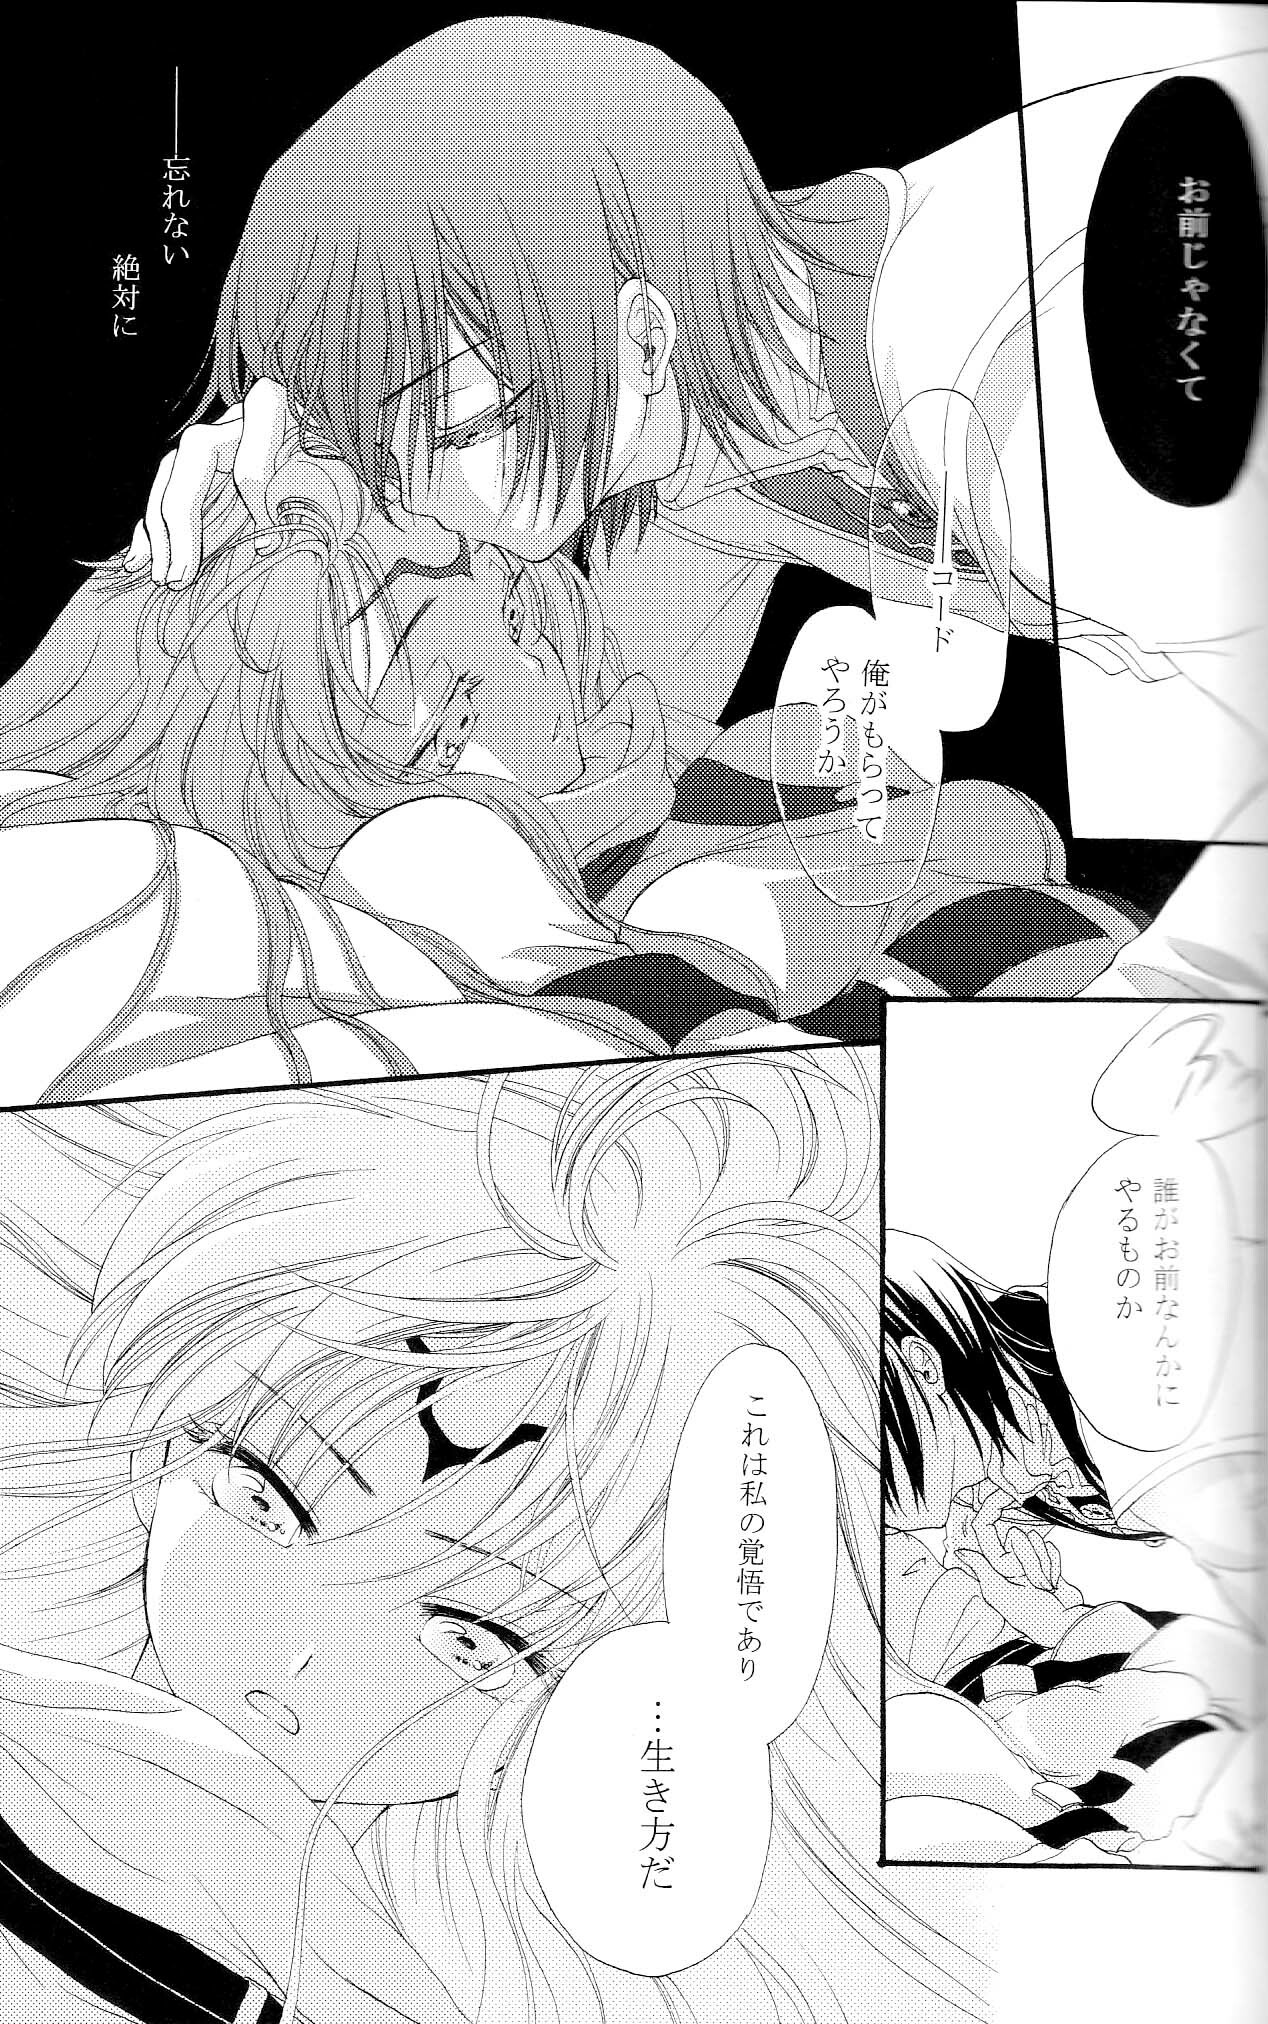 [APRICOT TEA] The last love letter presented to my dear only partner. (Code Geass) page 8 full